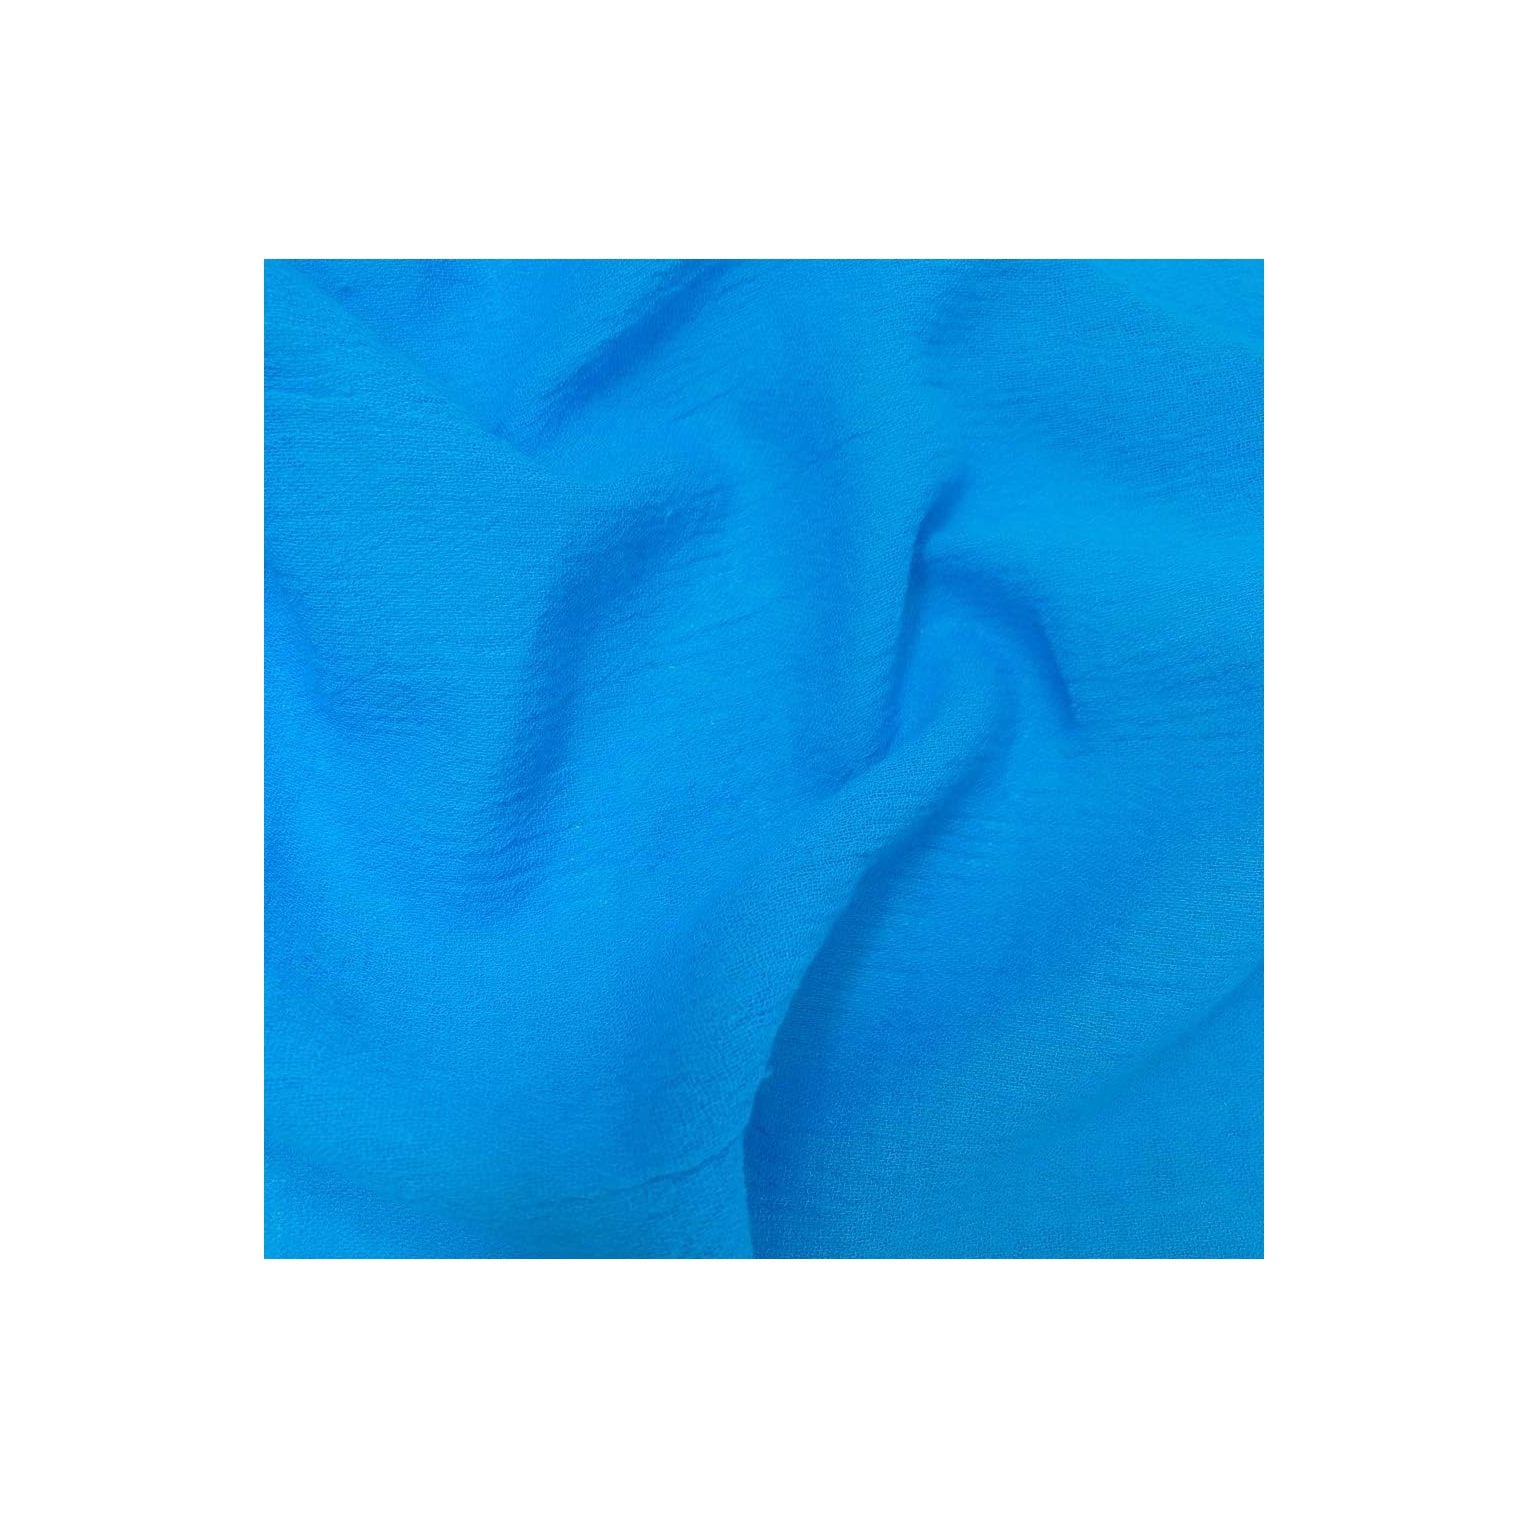 Cotton Gauze Fabric 100% Cotton 48/50 inches Wide Crinkled Lightweight Sold  by The Yard Many Colors (1 Yard, Turquoise) 